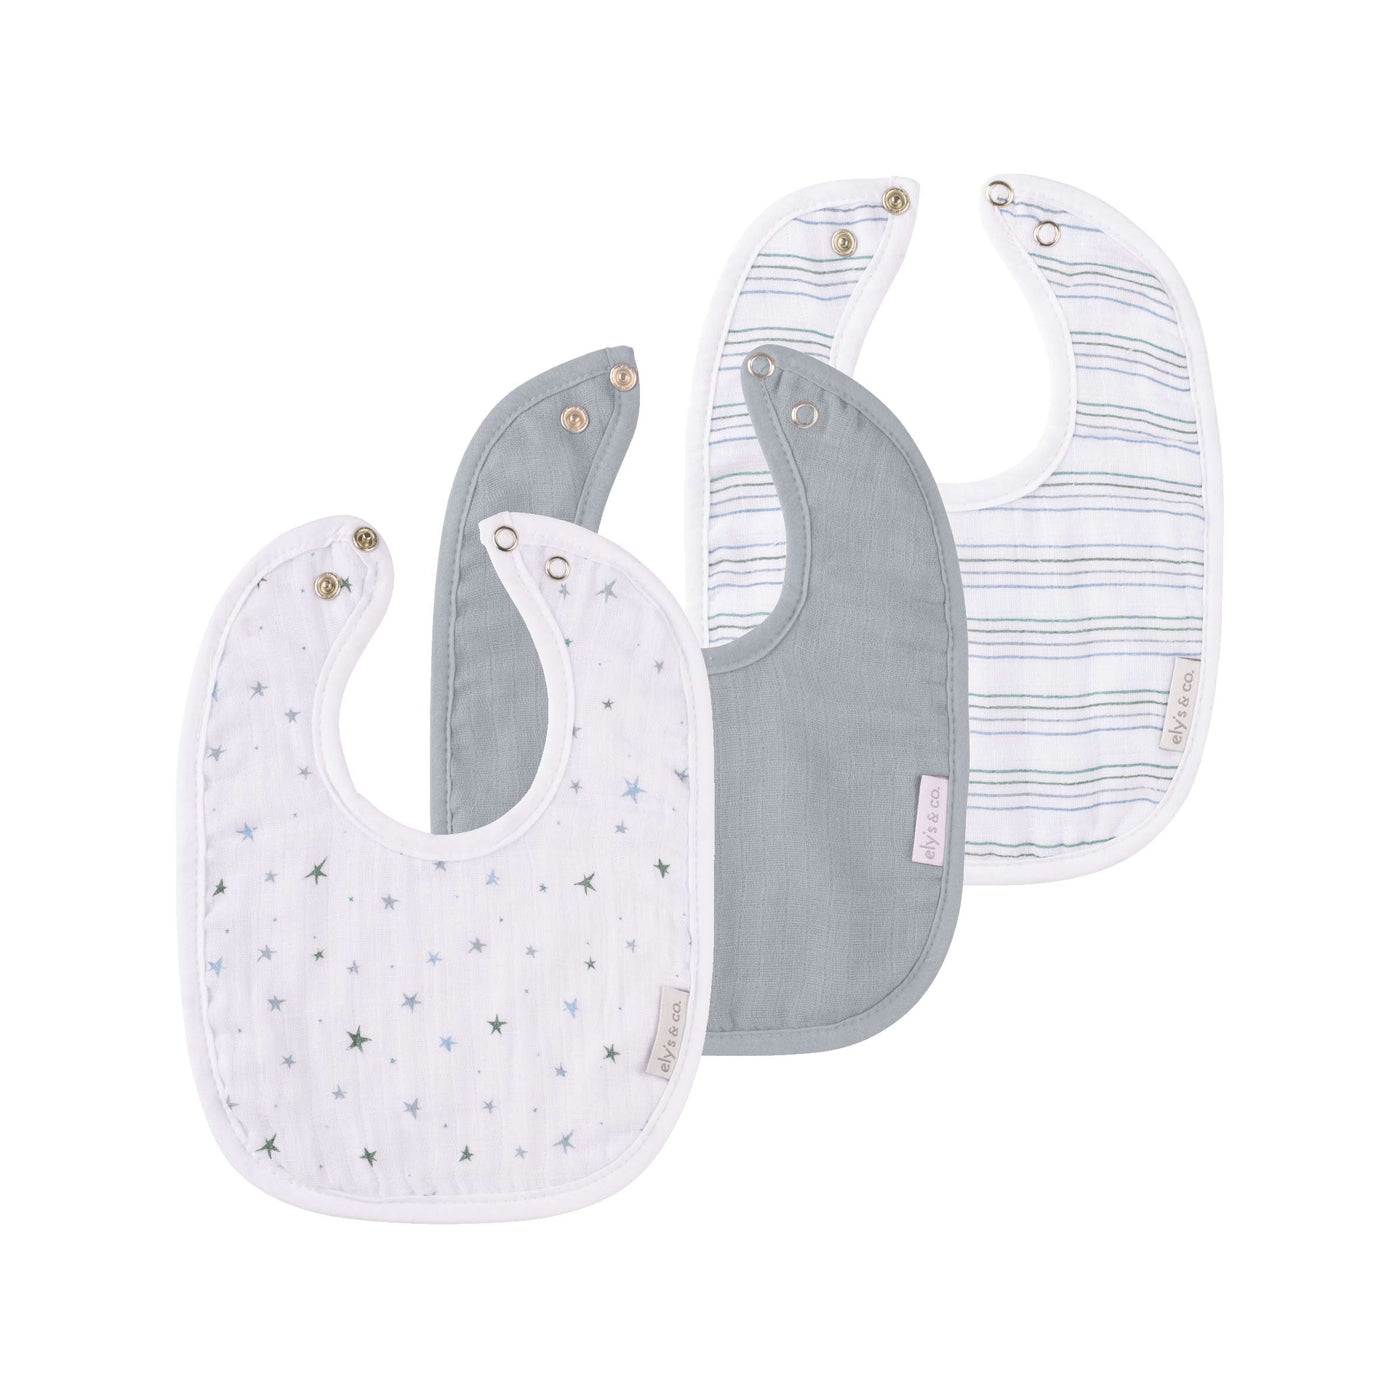 Ely's & Co. 3 Pack Bibs - Blue Stripe Collection